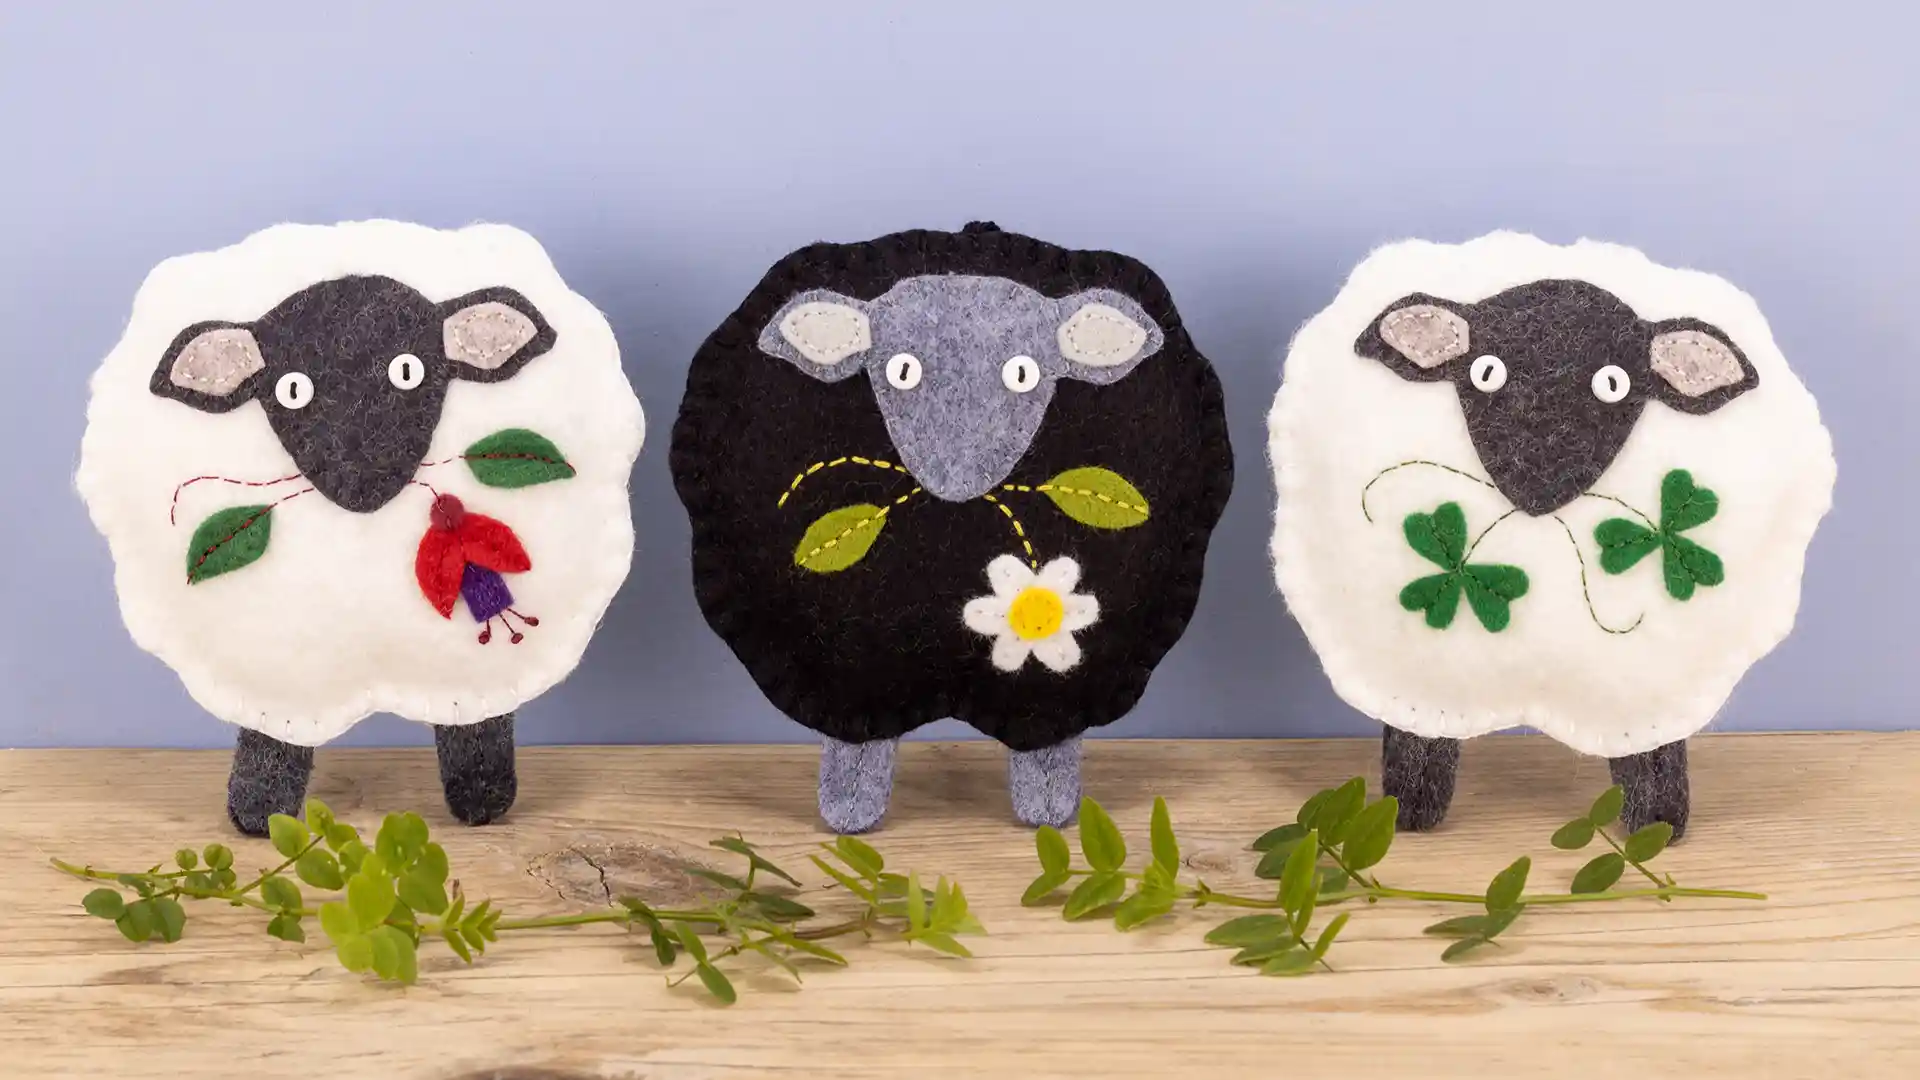 Three felt sheep ornaments. two white and one black, with Fuchsia, daisy and shamrock details.